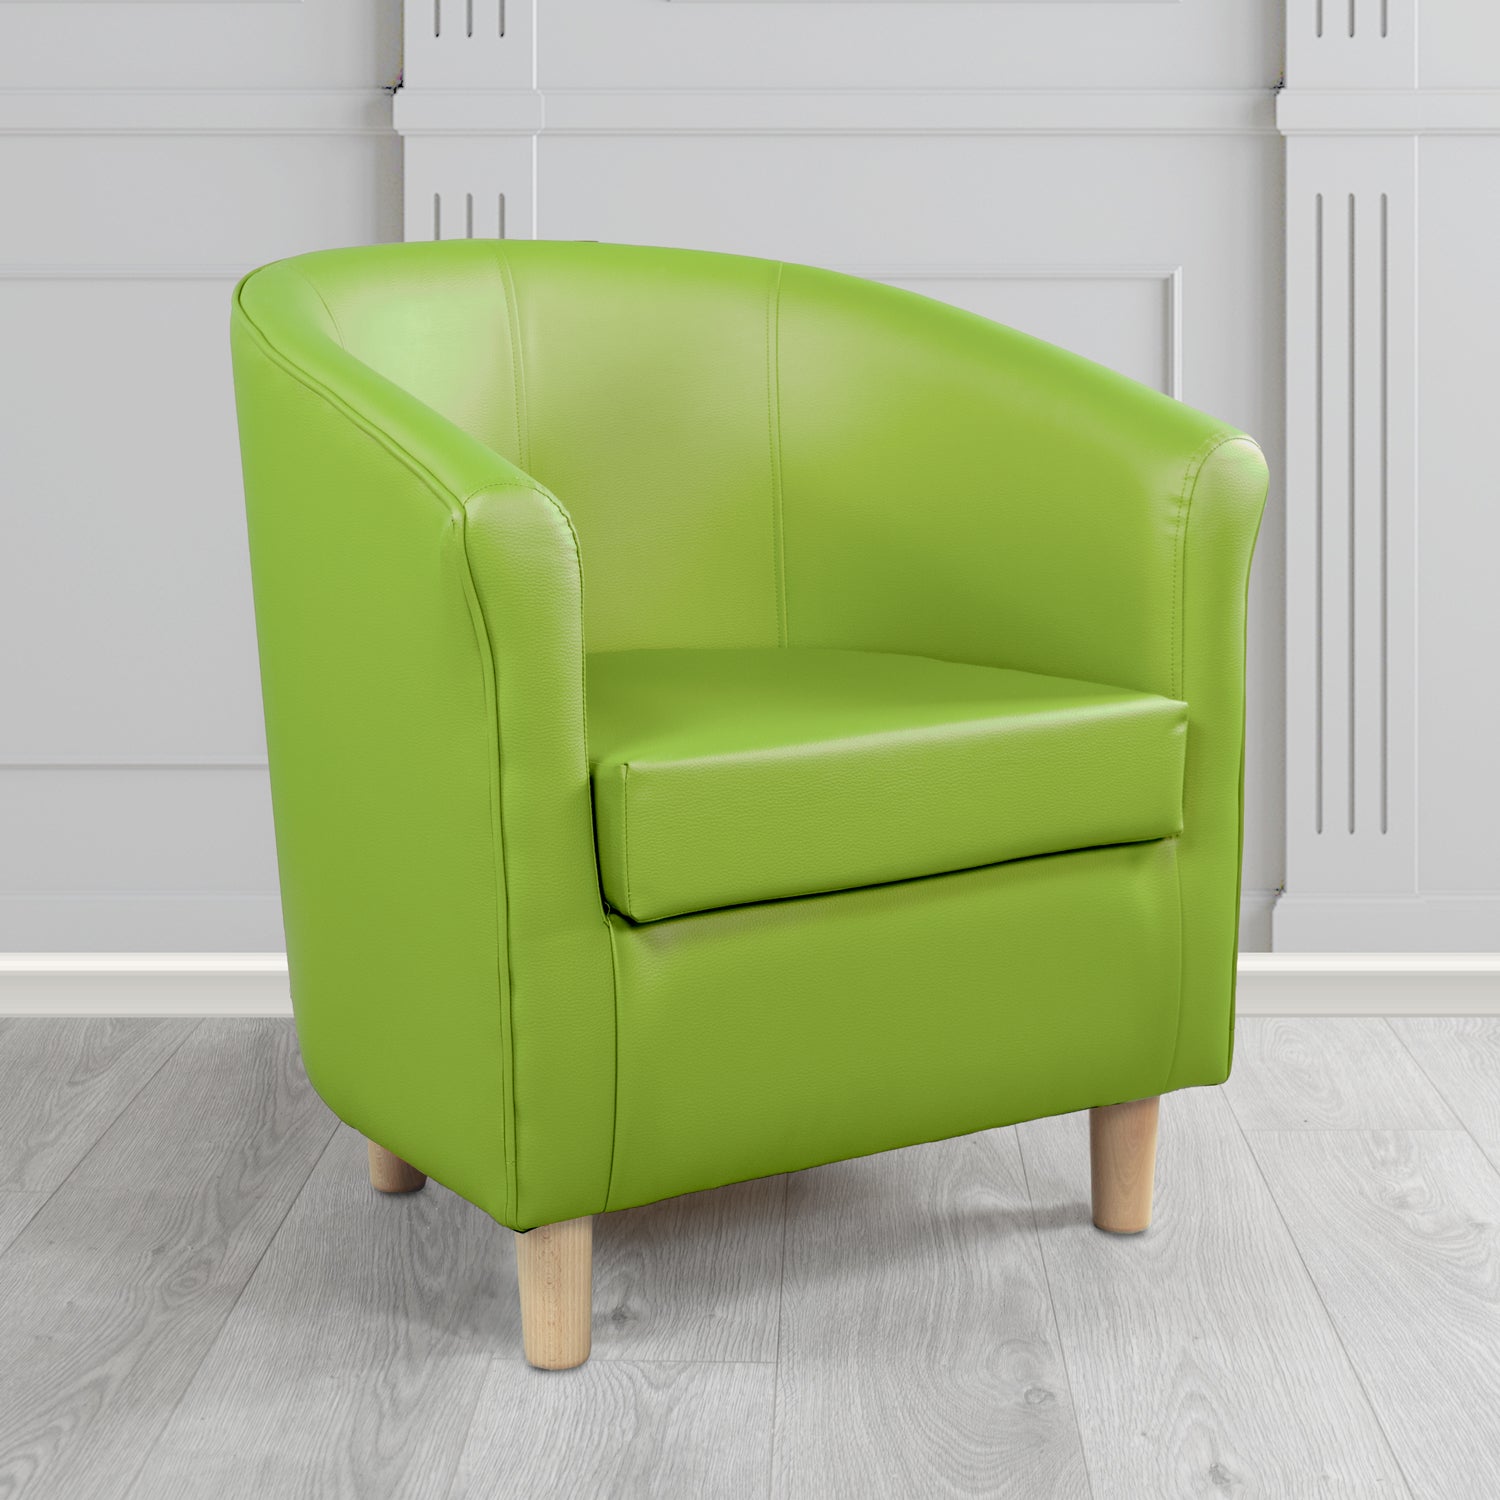 Tuscany Just Colour Citrus Green Antimicrobial Crib 5 Contract Faux Leather Tub Chair